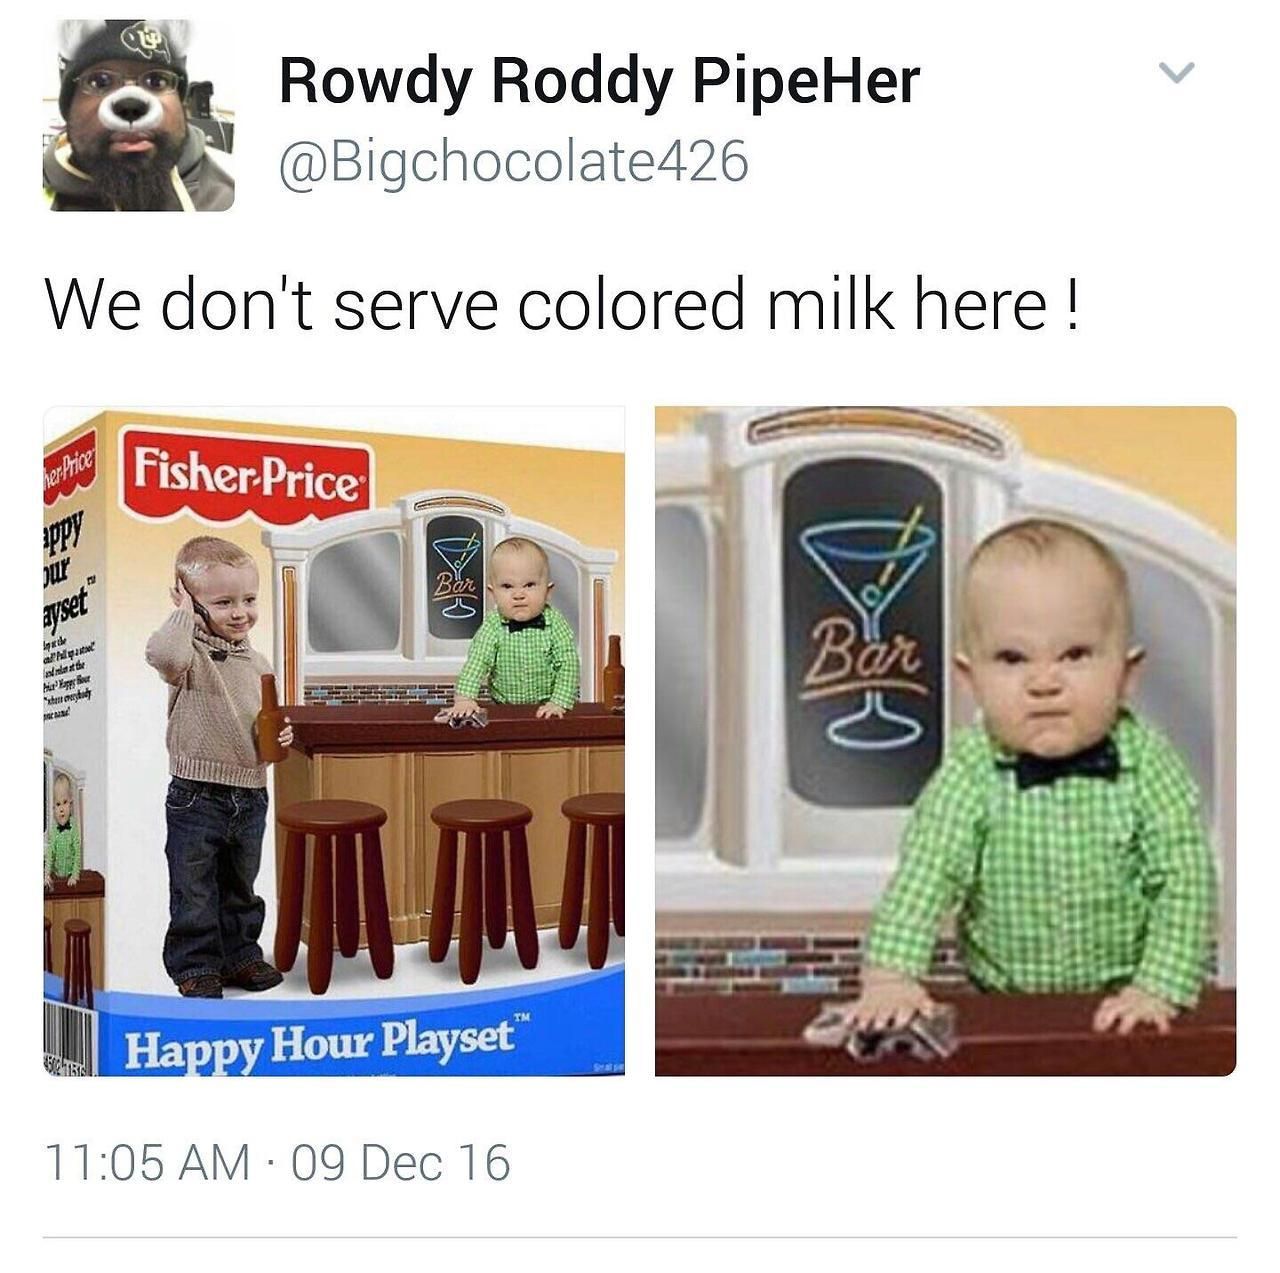 happy hour playset for toddlers - Rowdy Roddy Pipe Her We don't serve colored milk here ! Fisher Price Igade All enlar "stati Happy Hour Playset" 09 Dec 16